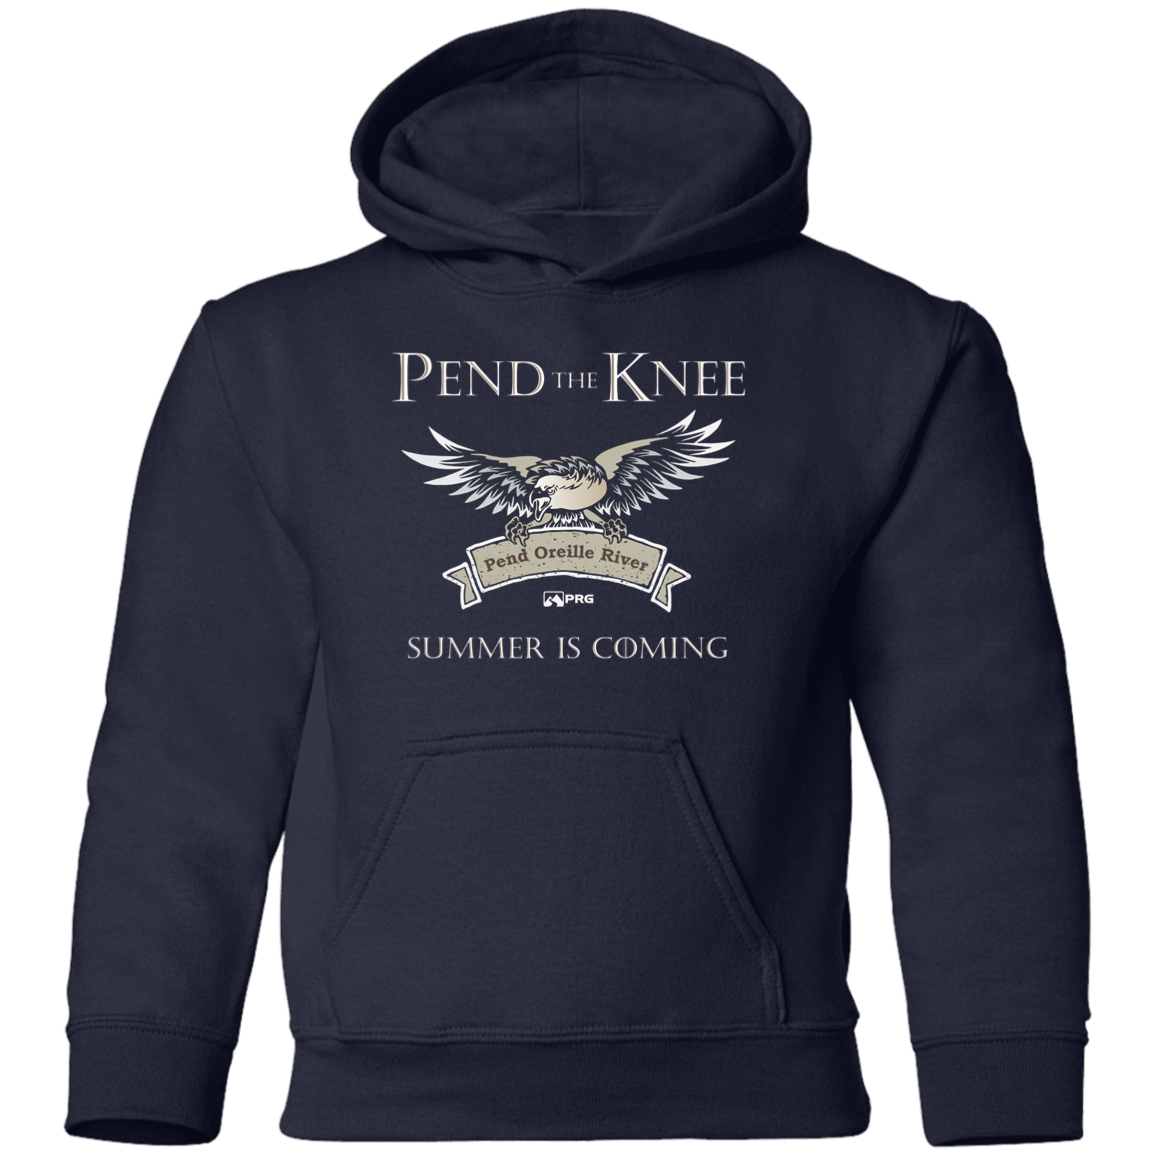 Pend the Knee - Youth Hoodie